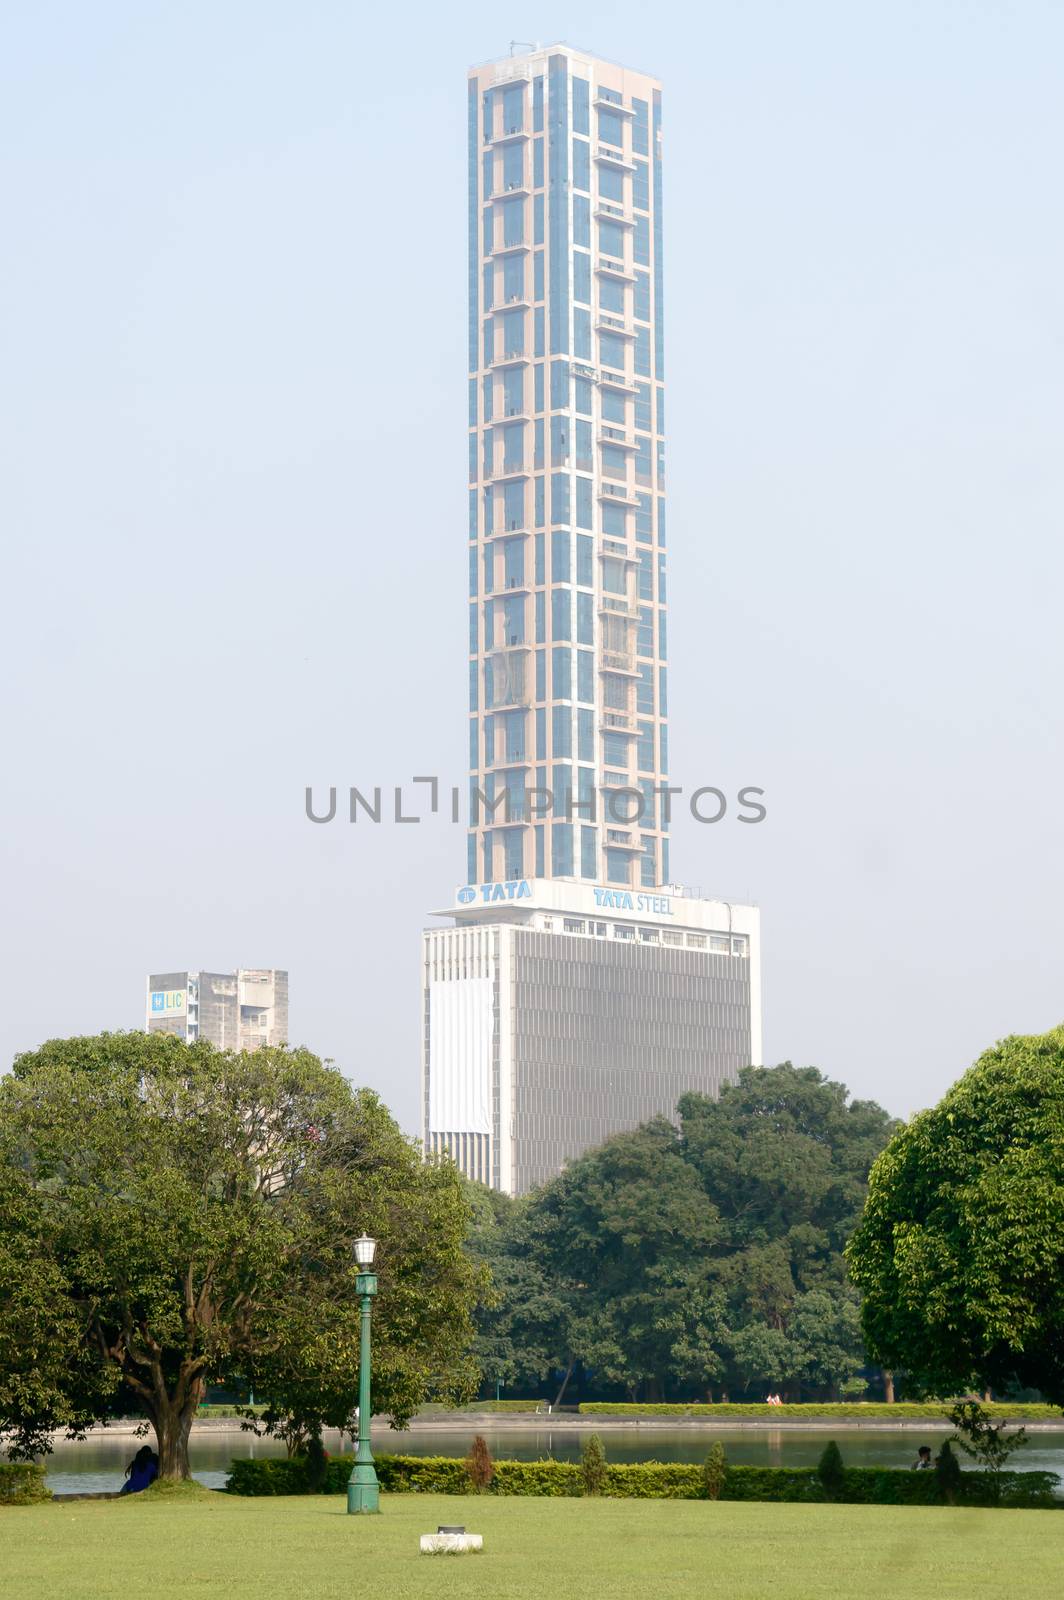 Tata Centre high-rise, sleek designed and steel tower tallest commercial buildings and important landmark located in central business district in city of joy, Kolkata, West Bengal, India Asia May 2019 by sudiptabhowmick